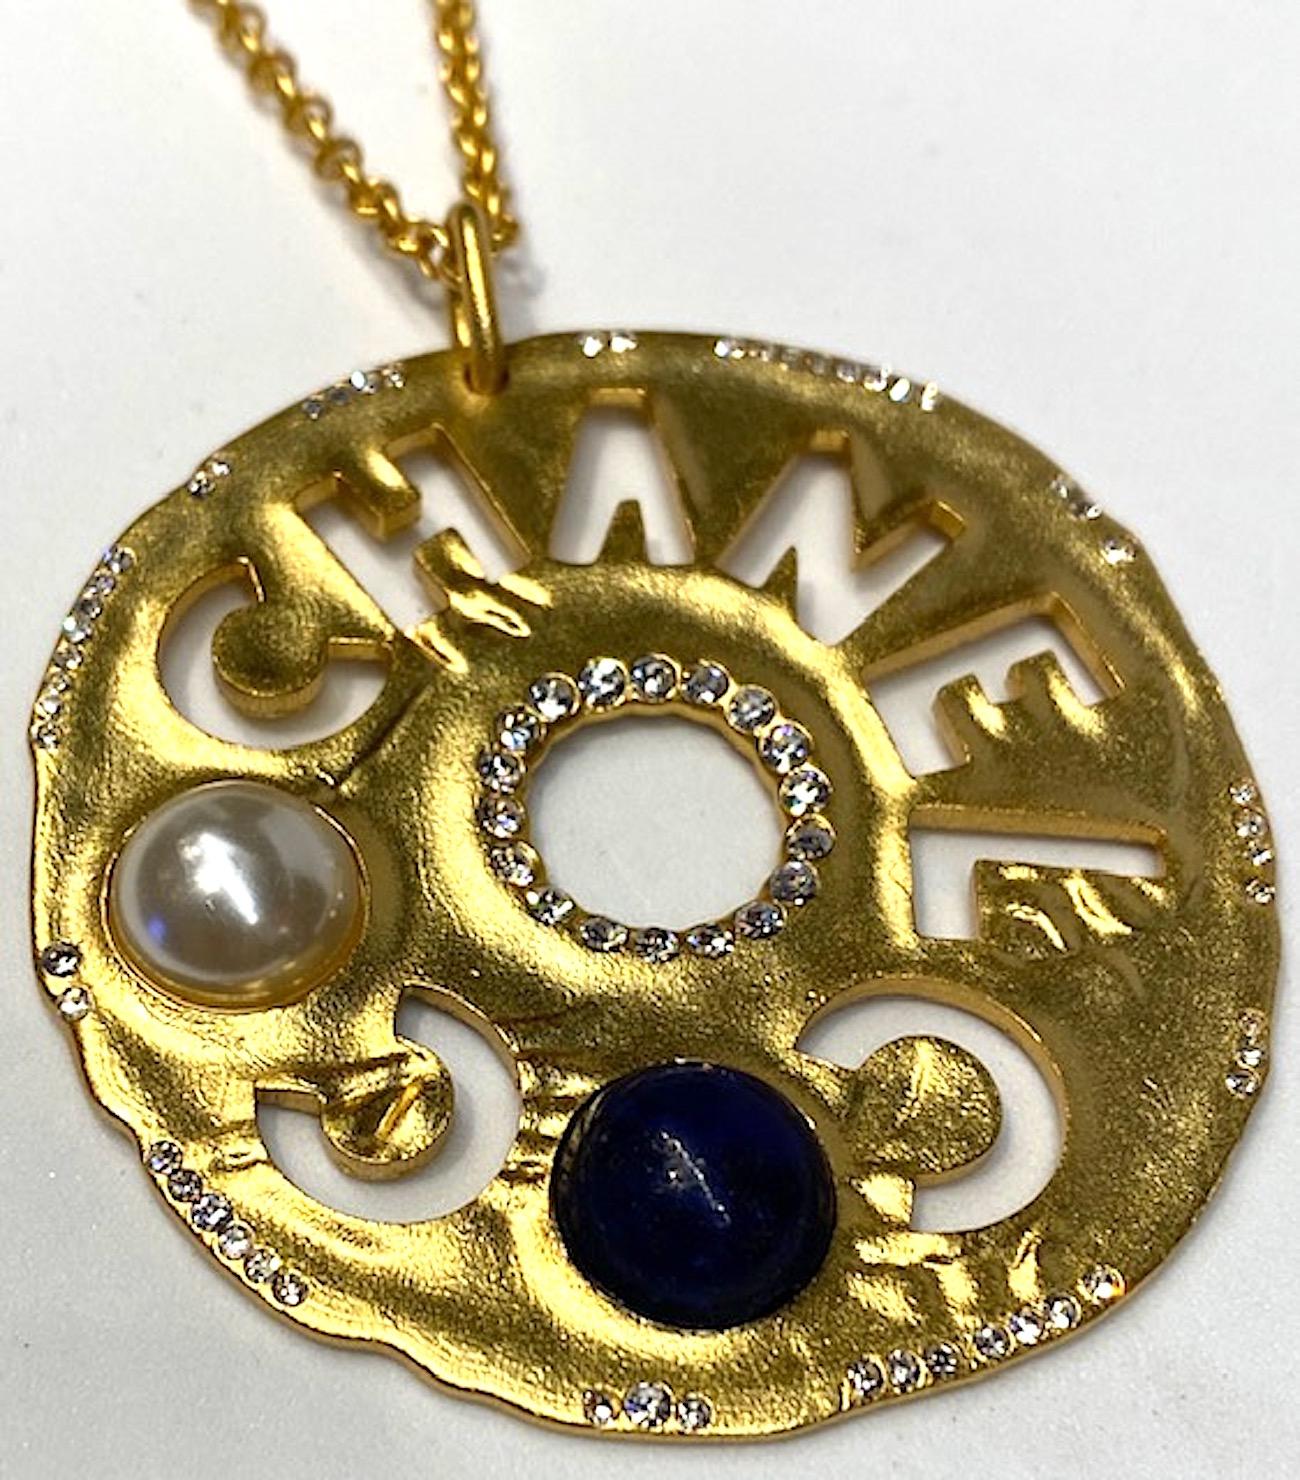 Chanel Cut Out Disk Pendant Necklace, 2019 Cruise Collection 4